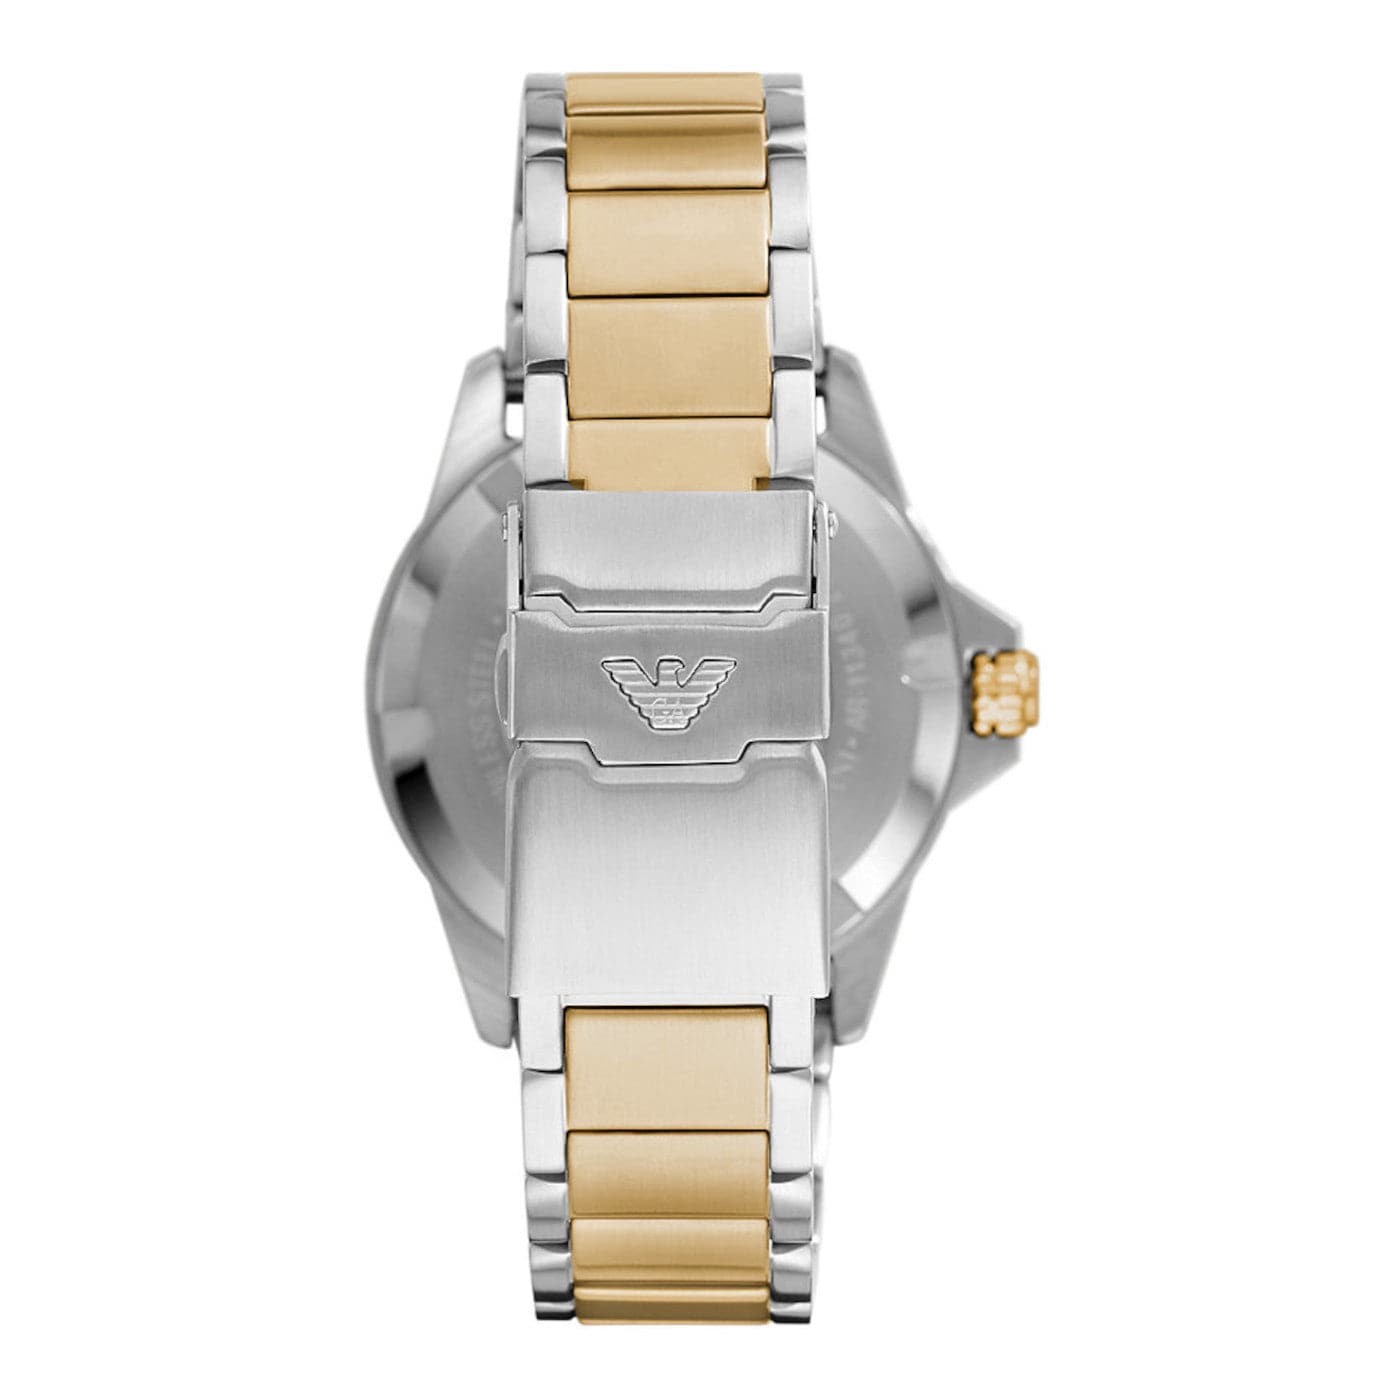 Emporio Armani Men's Dress Watch with Stainless Steel, Silicone, or Leather Band - Kamal Watch Company